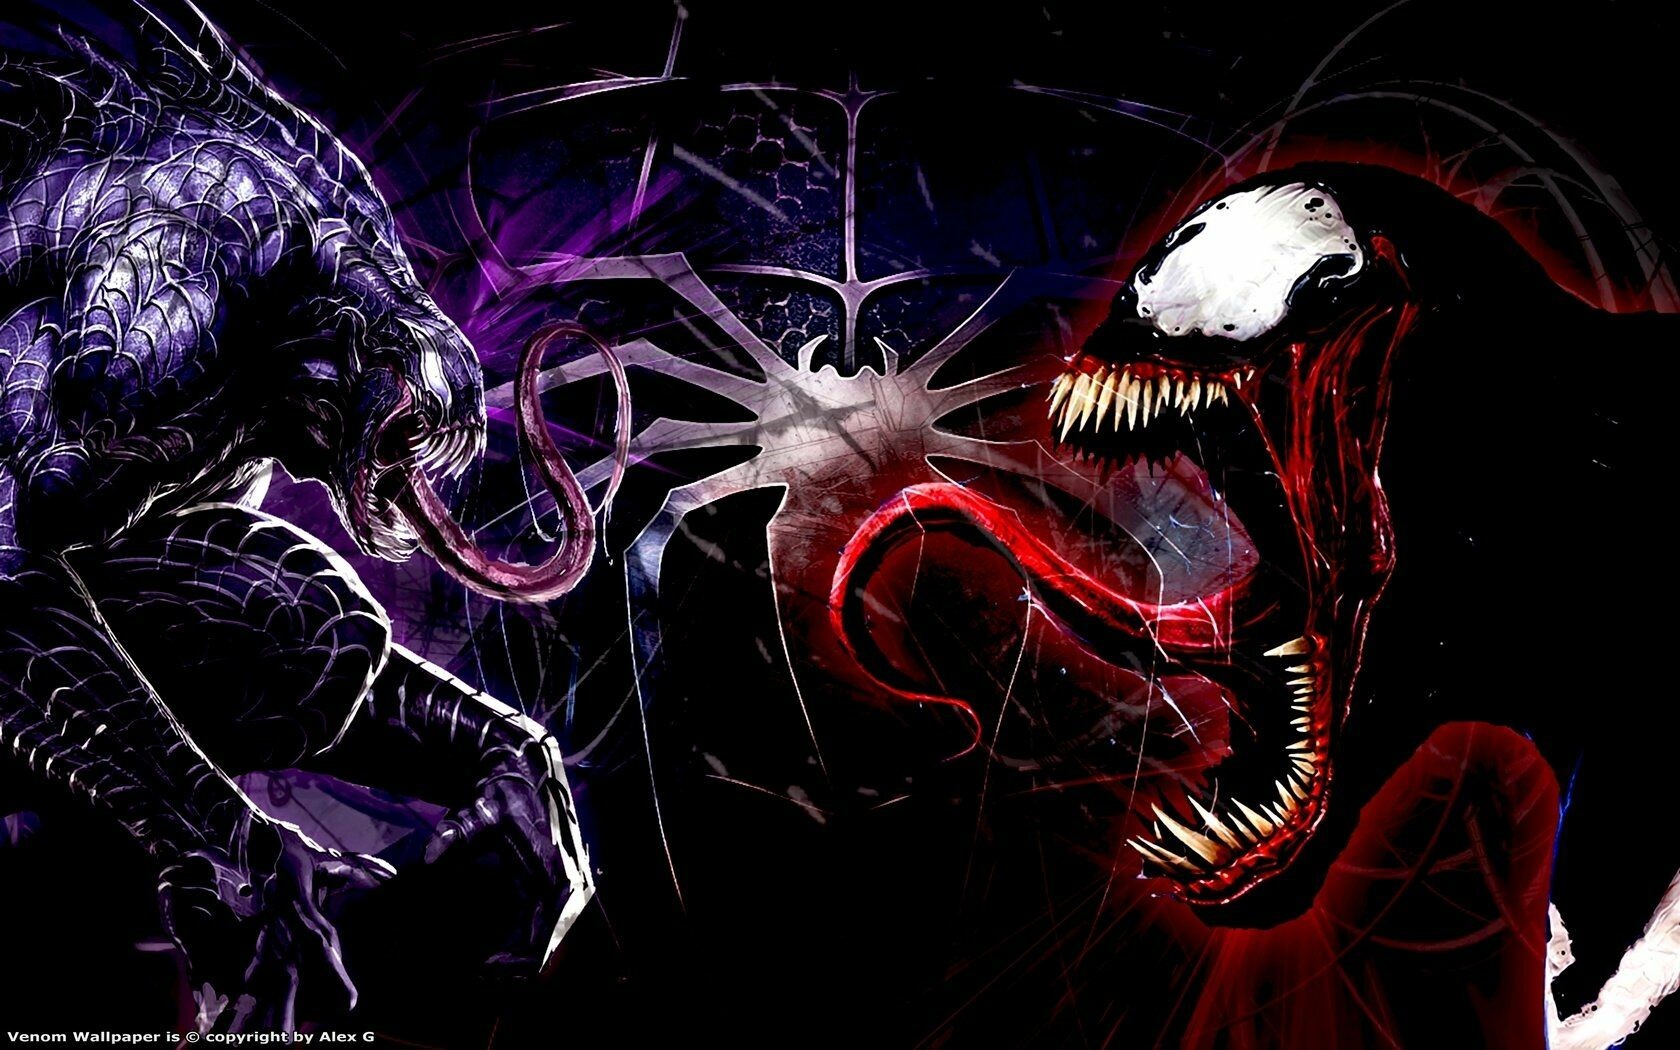 Spider Man Vs Carnage Wallpaper: HD, 4K, 5K For PC And Mobile. Download Free Image For IPhone, Android